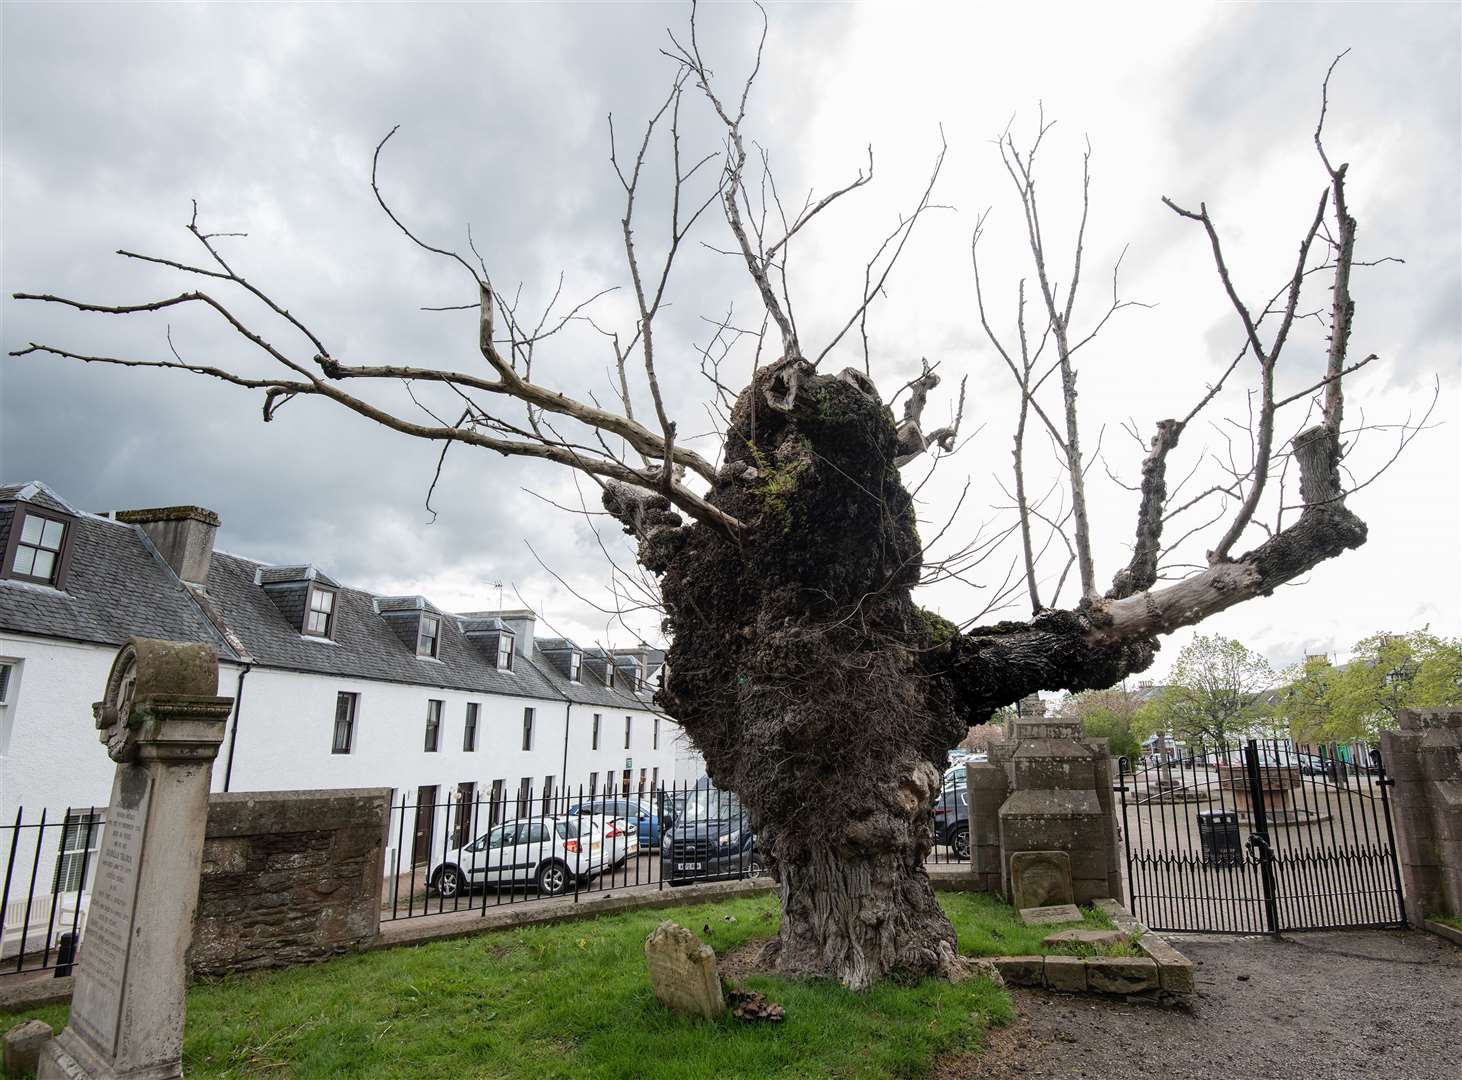 The Beauly Elm before it fell over earlier this year.